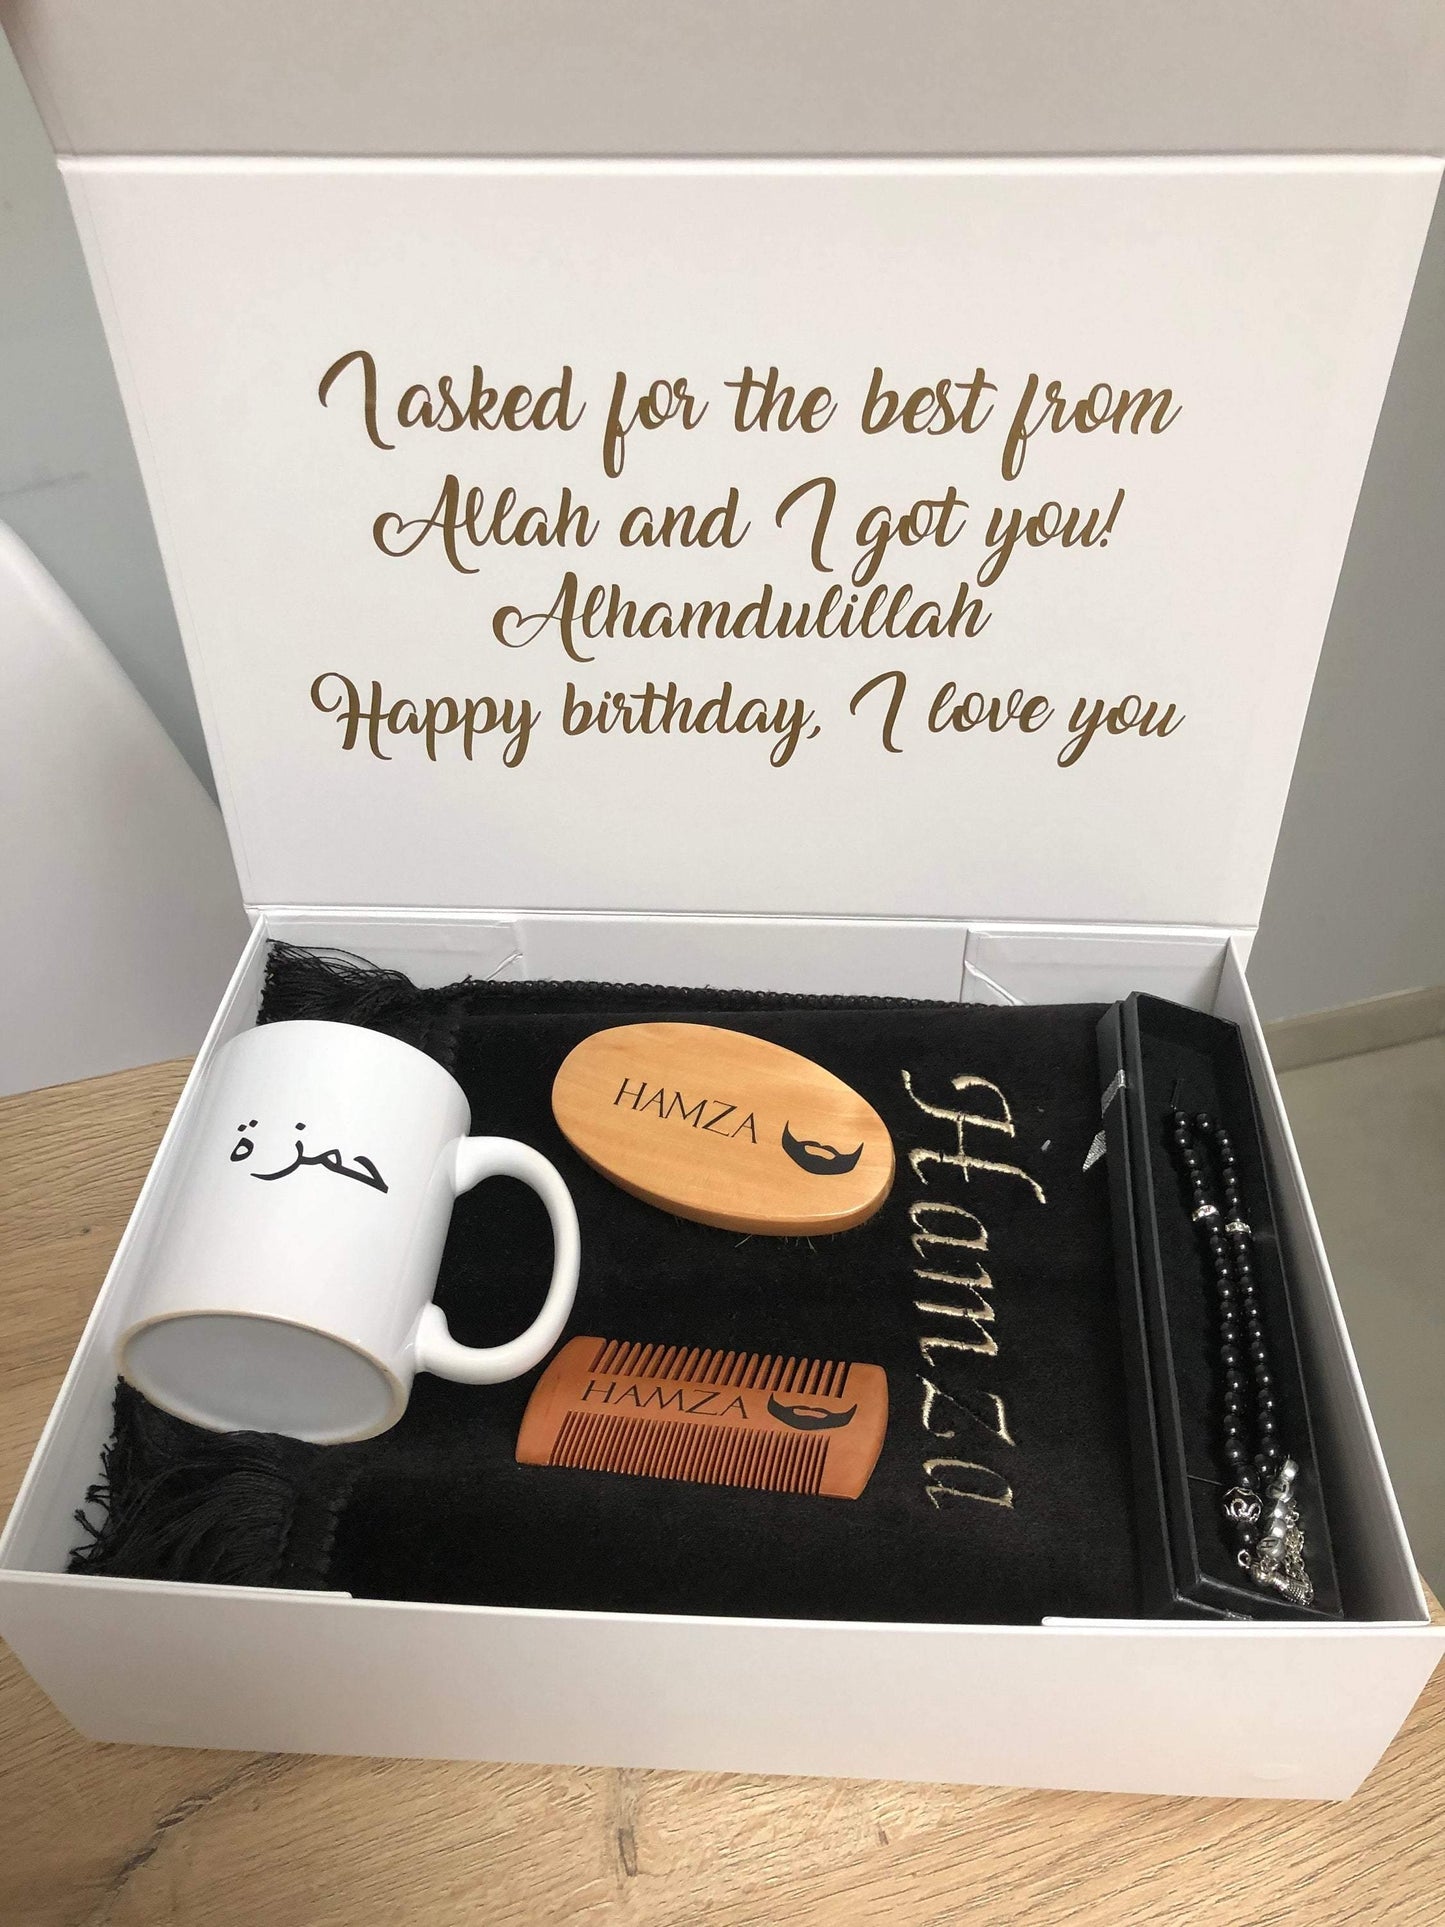 Personalized gift box for him (Rug - Tasbih - Comb - Brush - Mug) - Unique Tasbihs & Gifts